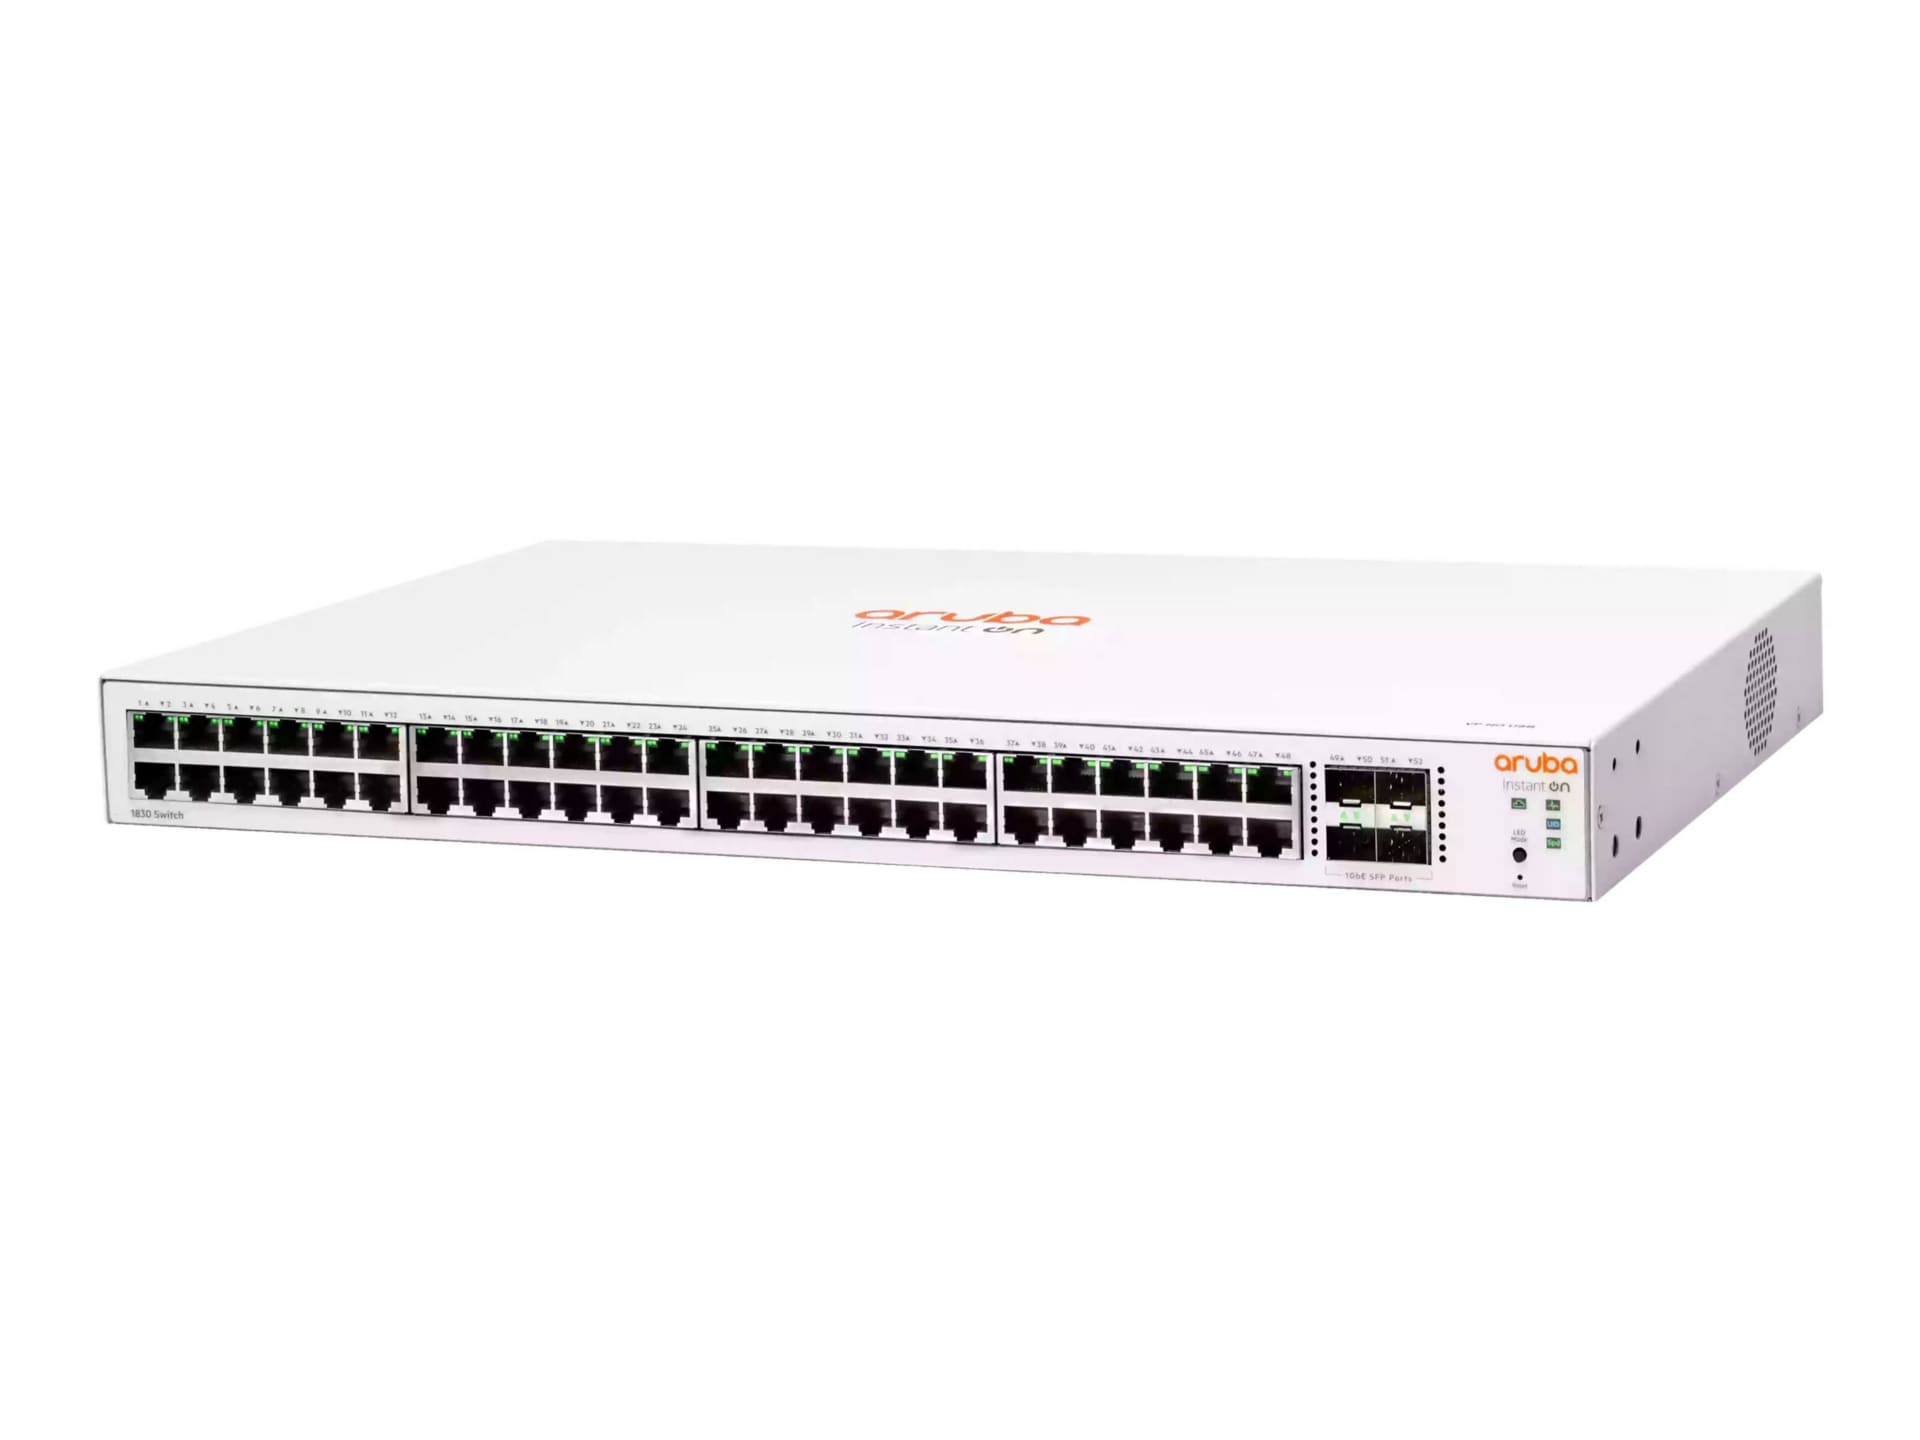 HPE HPE Networking Instant On 1830 48G 4SFP Switch - switch - 48 ports - sm